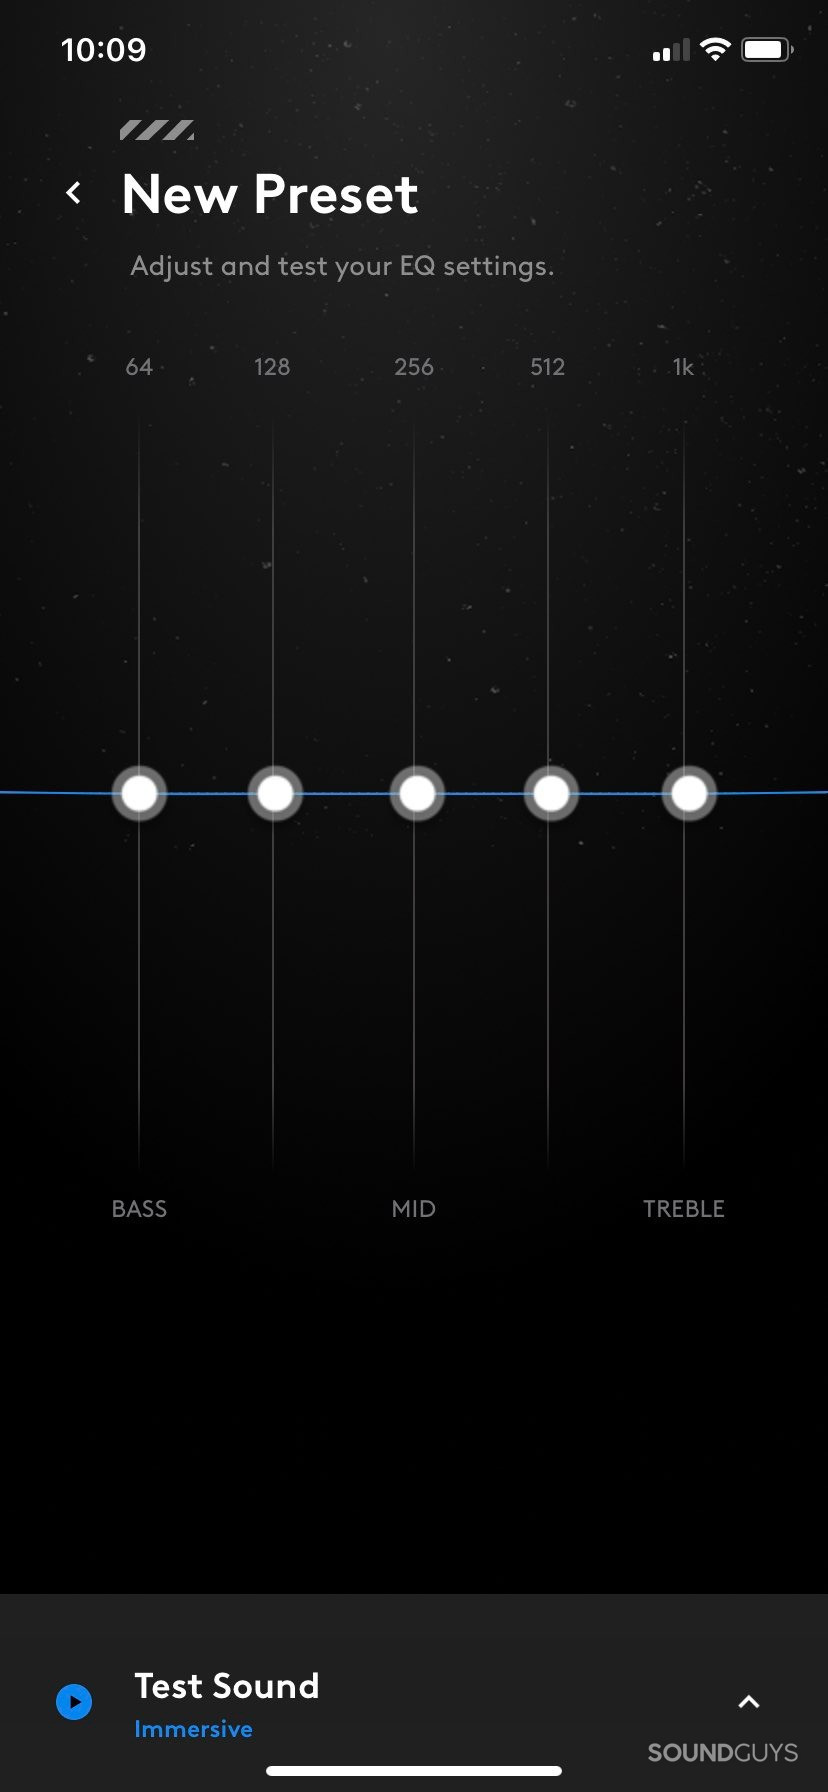 The equalizer in the Logitech G app.